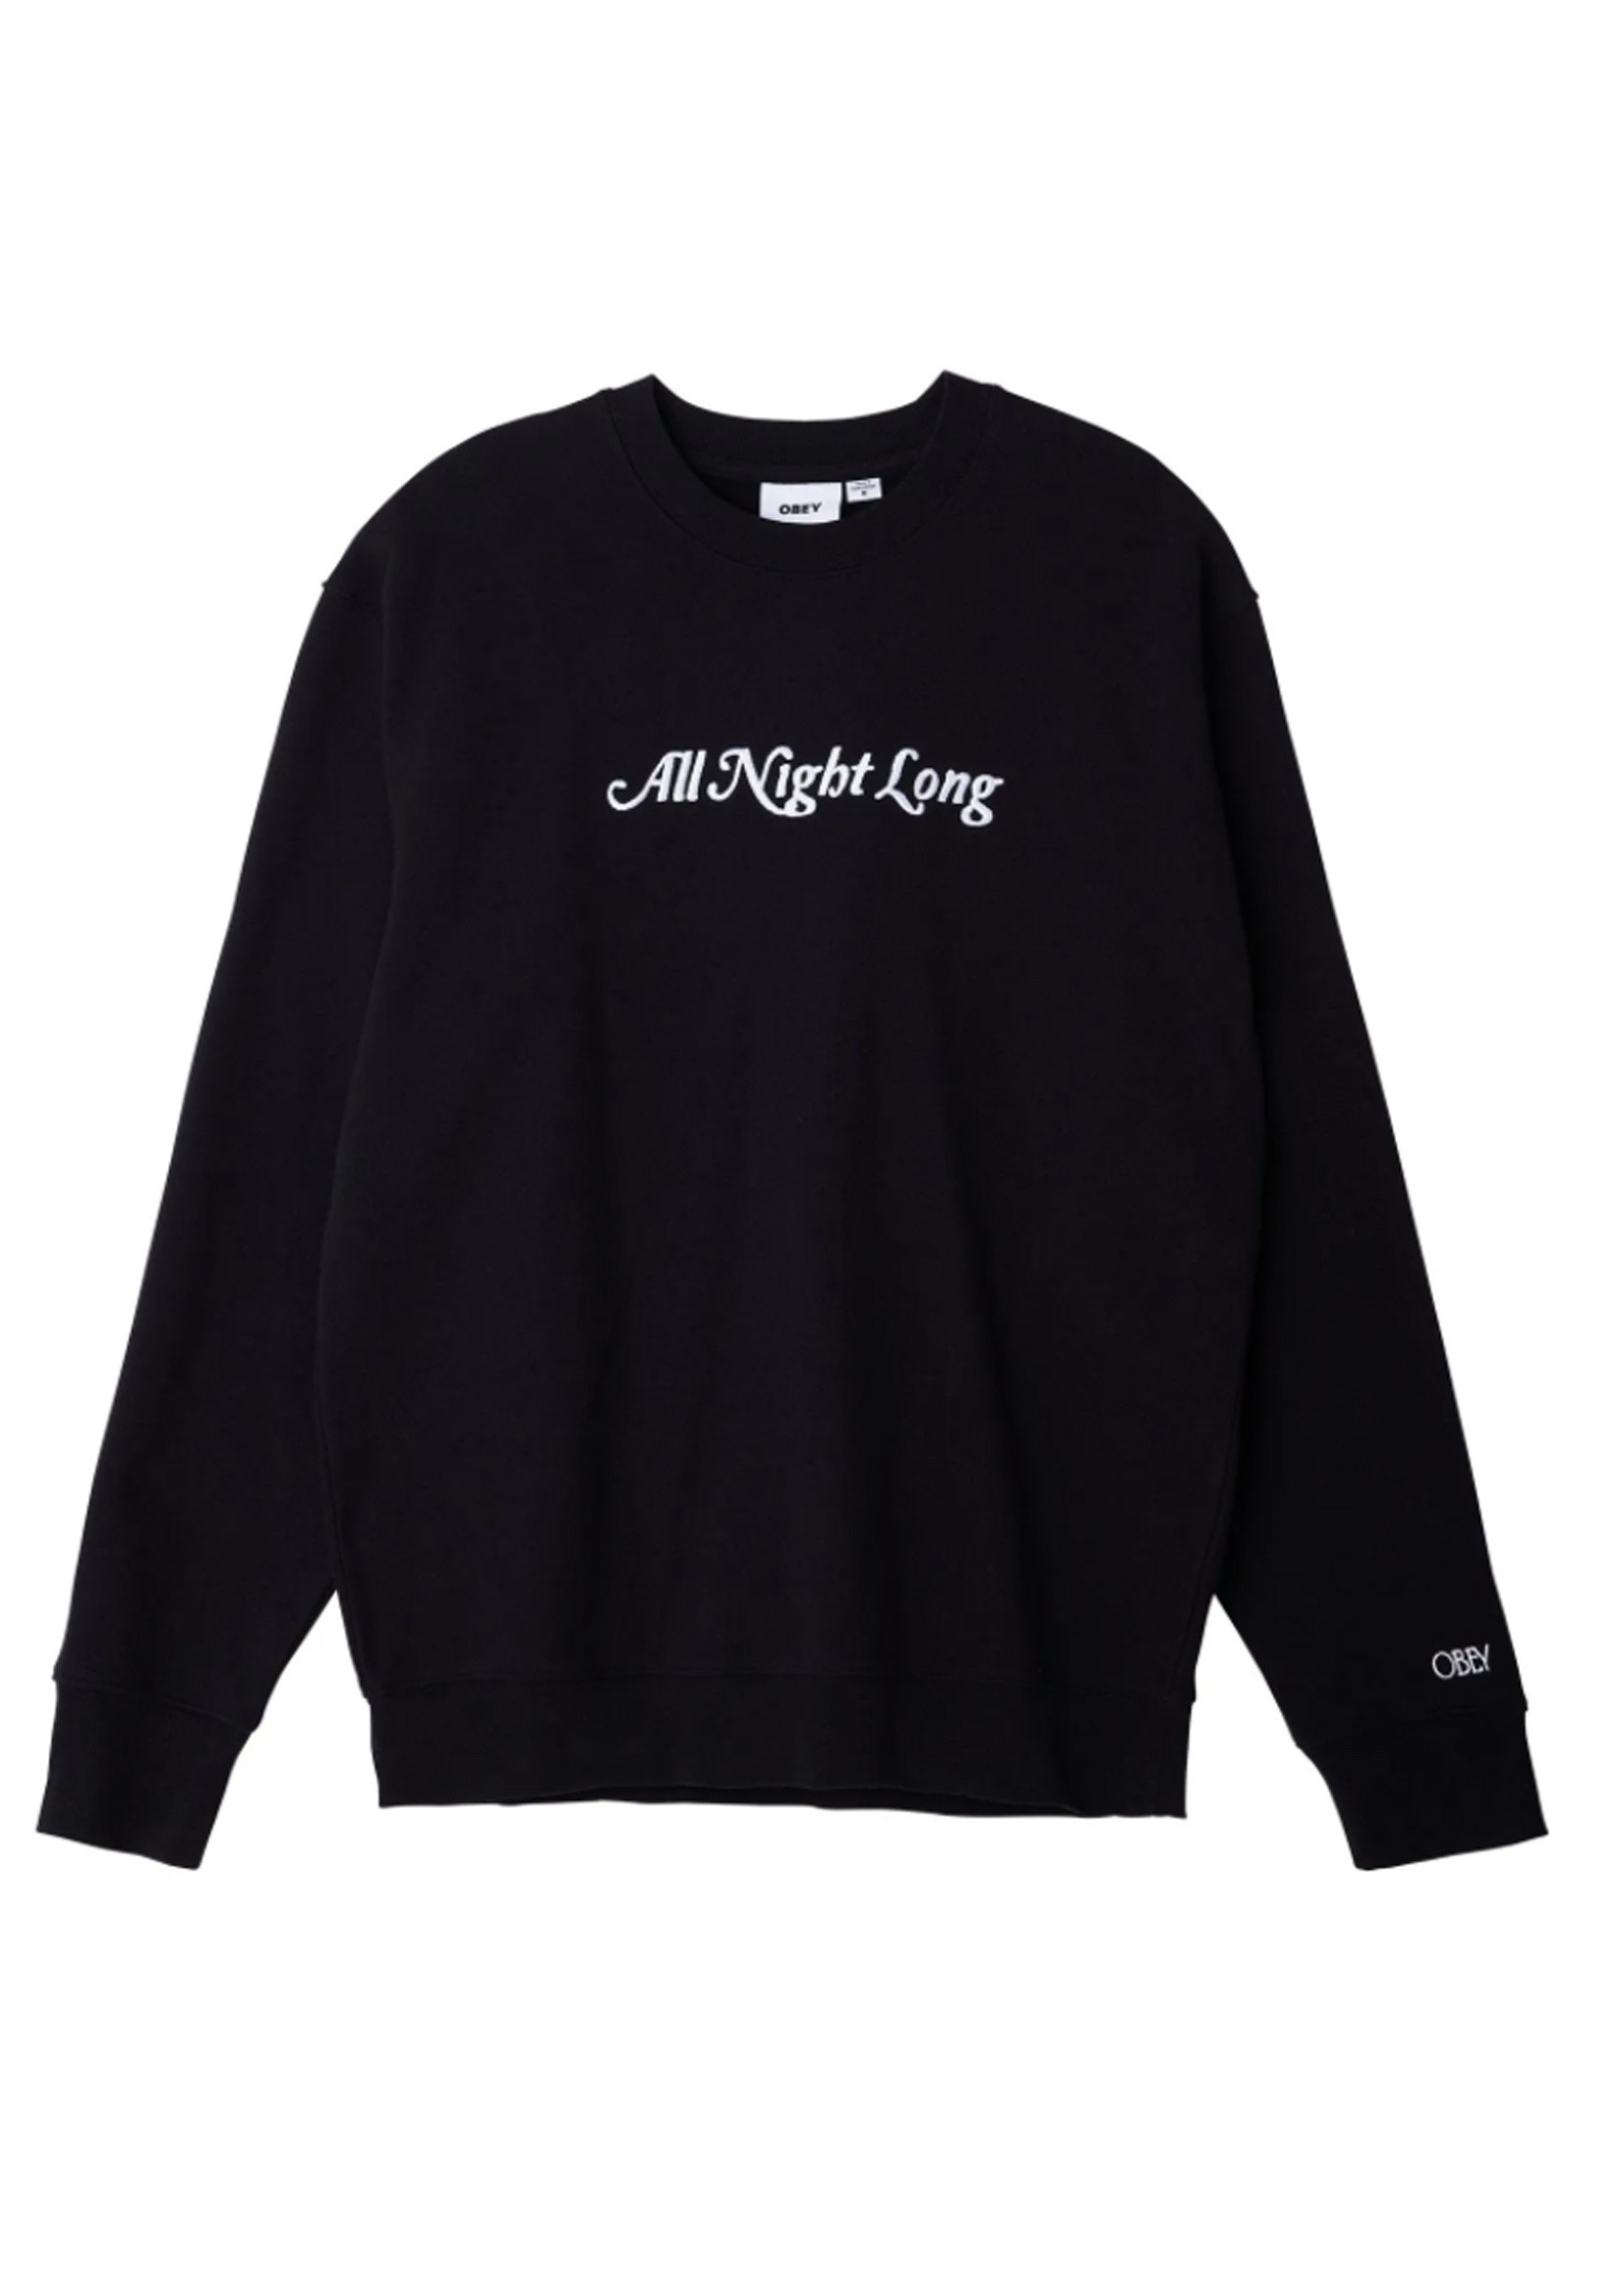 OBEY OBEY / All Night Long Crewneck